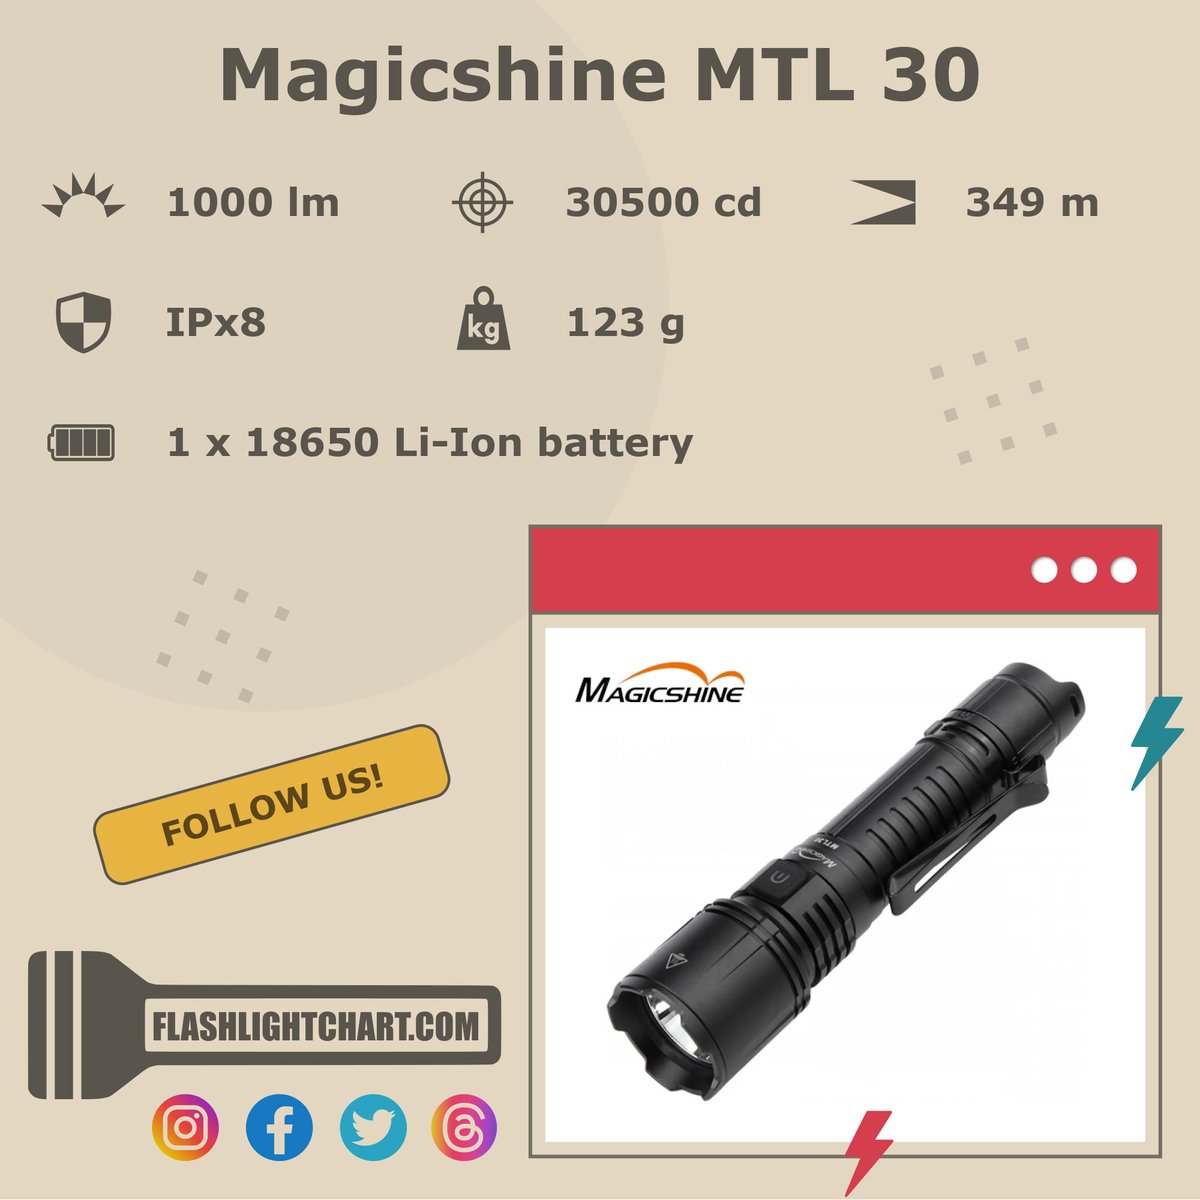 🔦 Magicshine MTL 30 Flashlight Review 🔦

🟢 Pros: mode memory, tactical strobe, ...
🔴 Cons: no built-in charger, ...

For more details, visit our website!

#FlashlightChart
#Magicshine #MagicshineFlashlight #MagicshineLight #MagicshineFlashlights

flashlightchart.com/magicshine/mag…